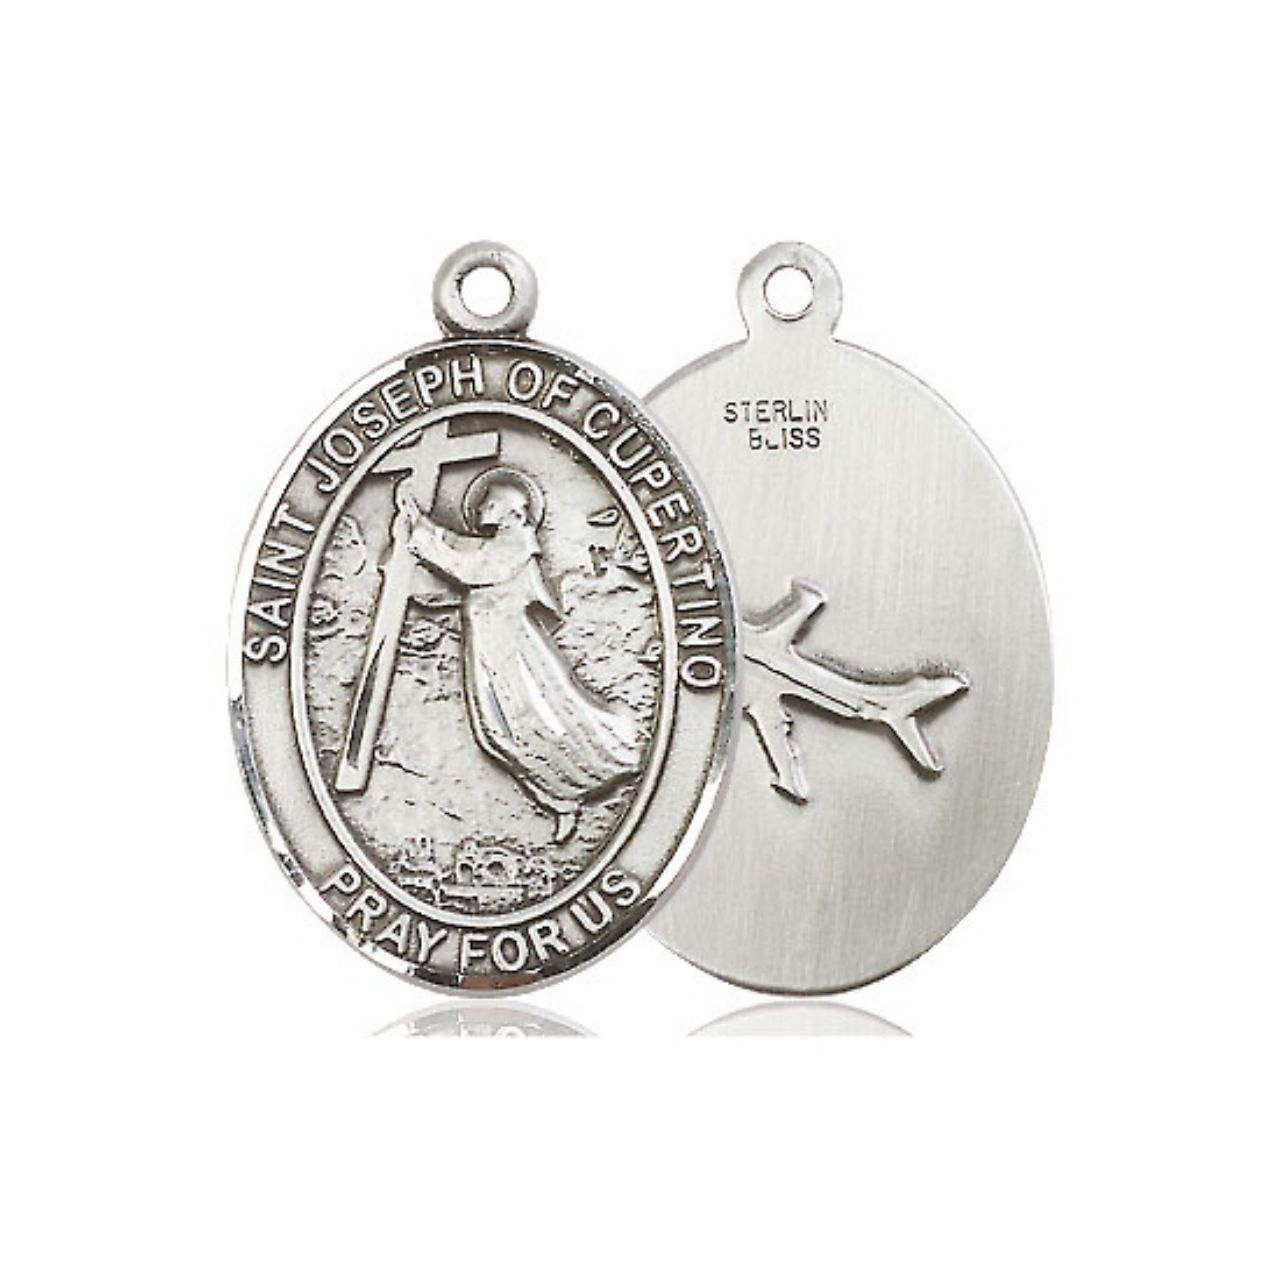 St. Joseph Cupertino Pilot Medal - Sterling Silver Oval Pendant (3 Sizes)